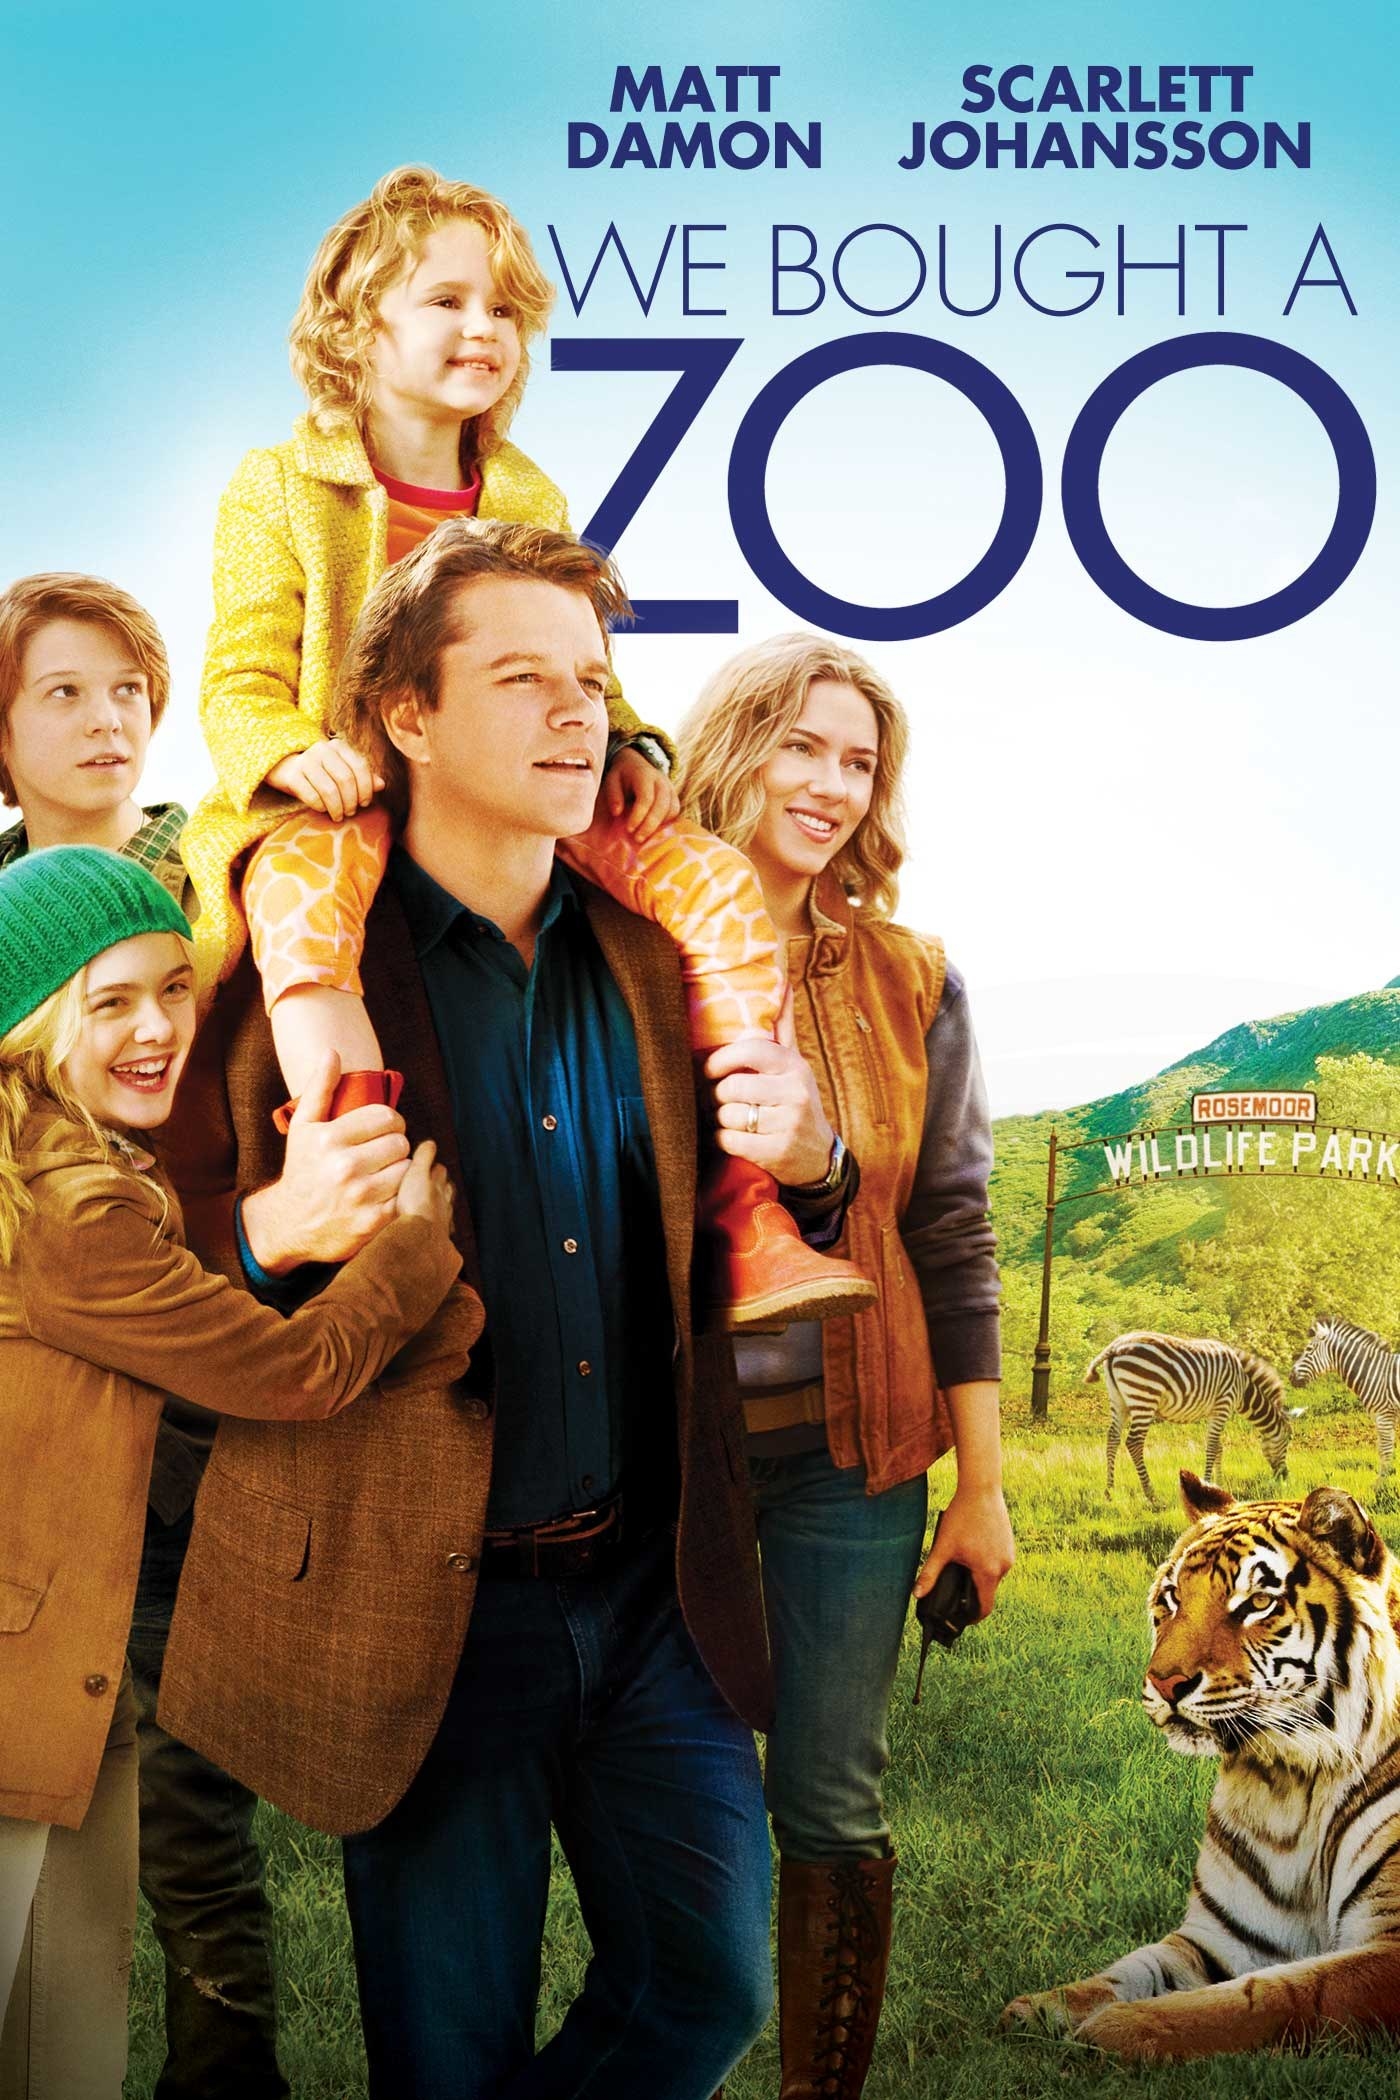 The poster for We bought a zoo.